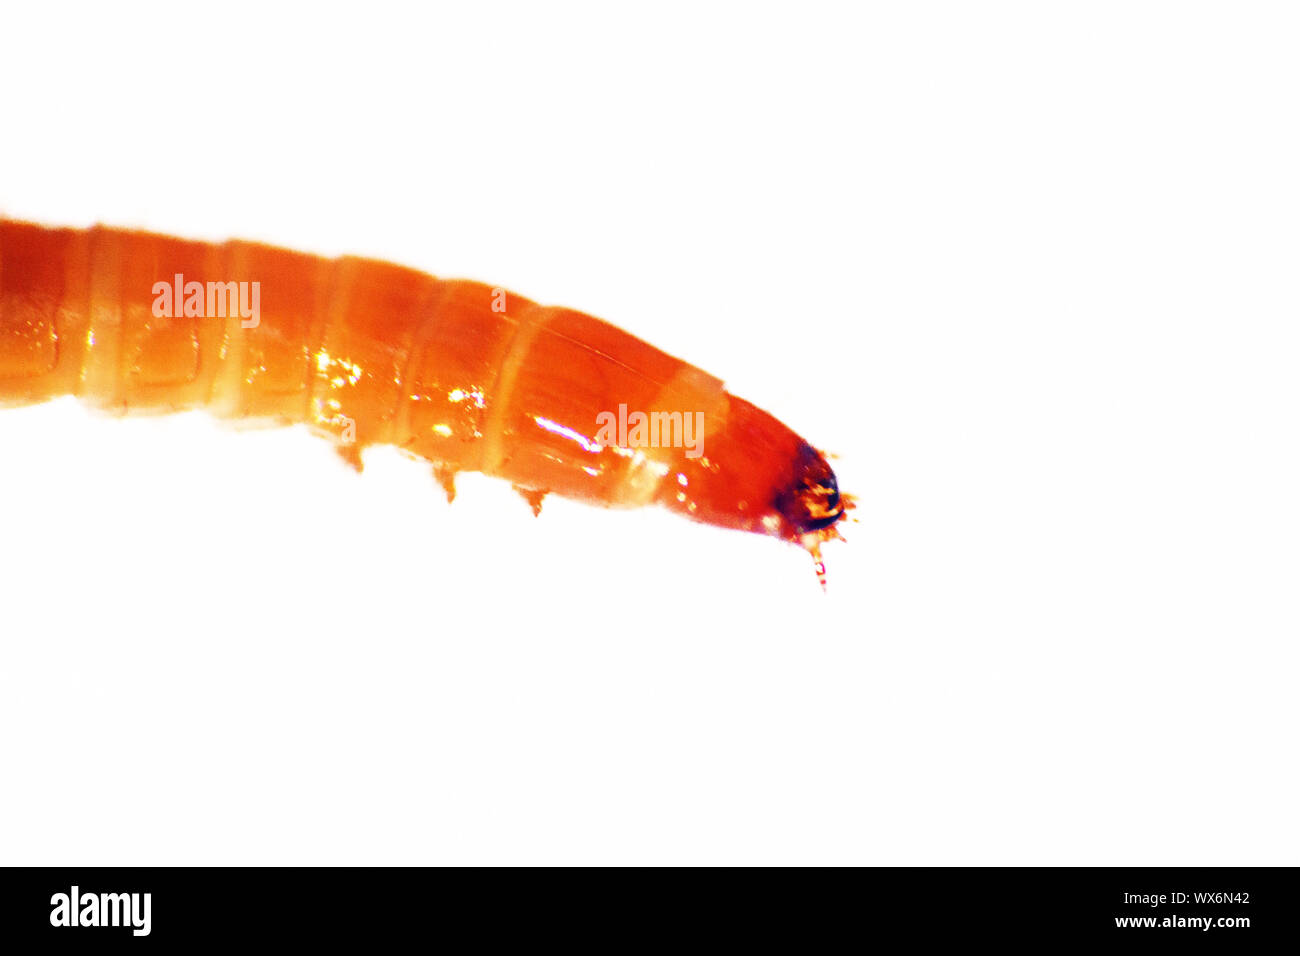 The larva of a beetle Stock Photo